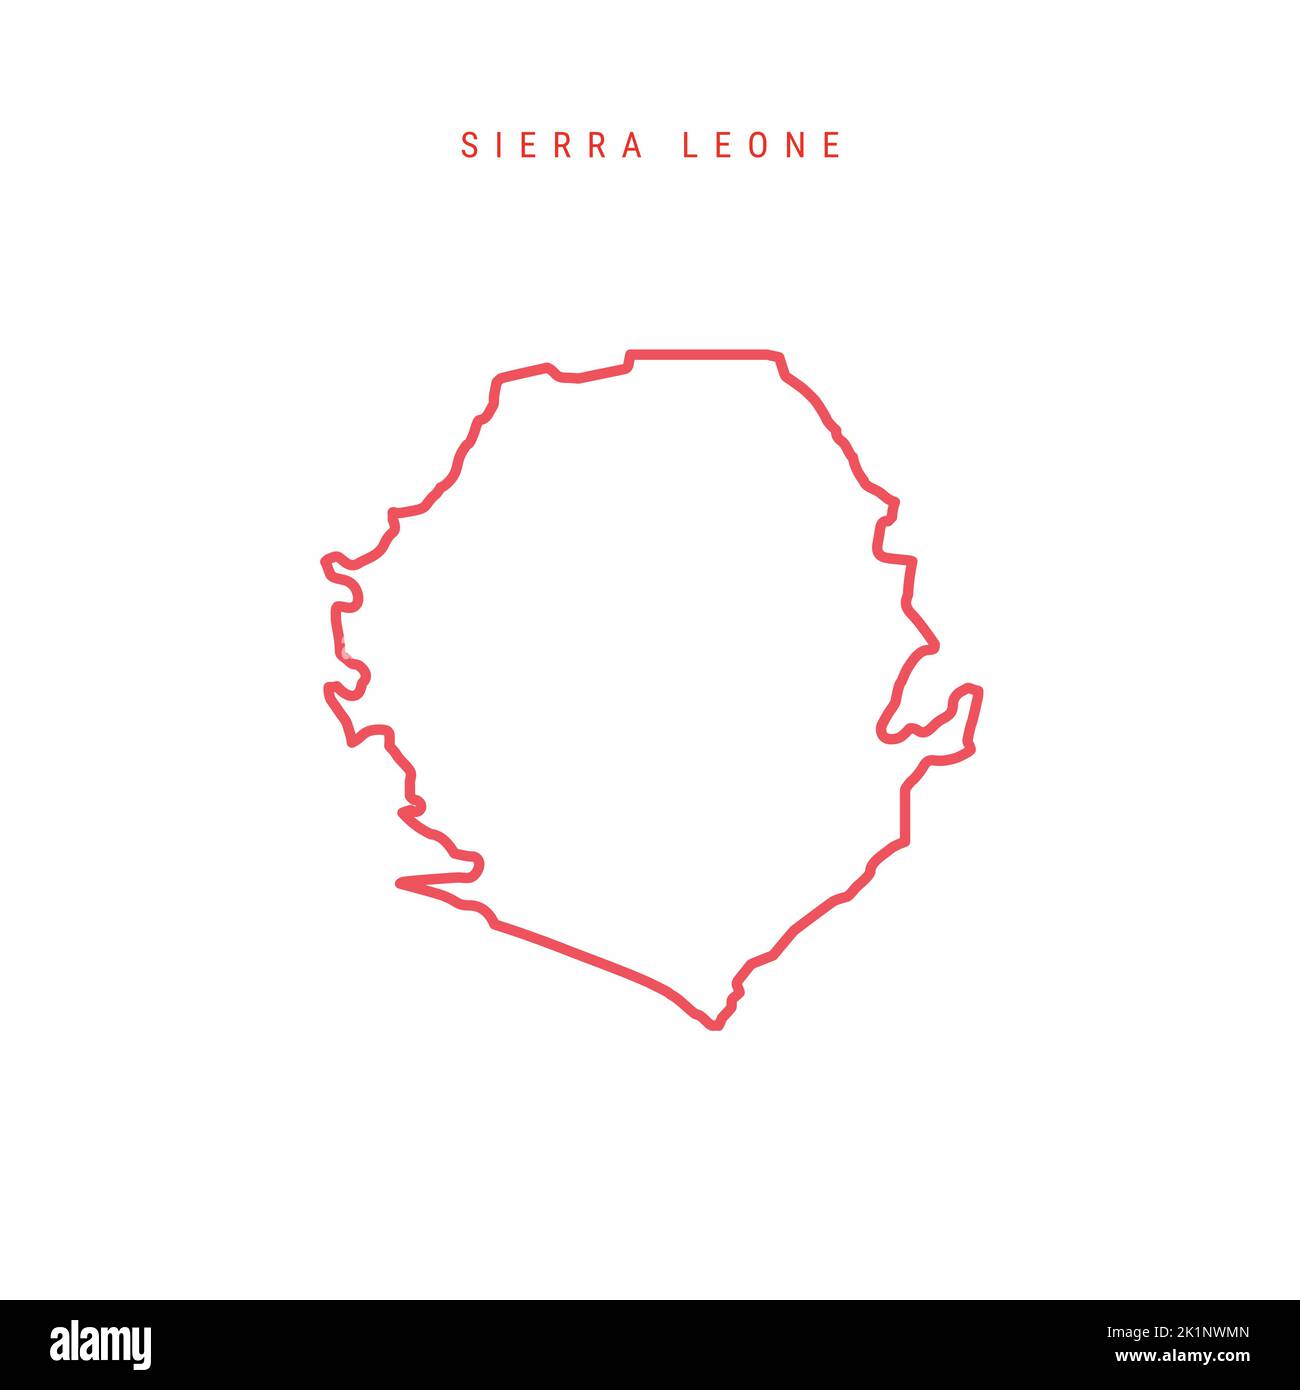 Sierra Leone editable outline map. Salone red border. Country name. Adjust line weight. Change to any color. Vector illustration. Stock Vector